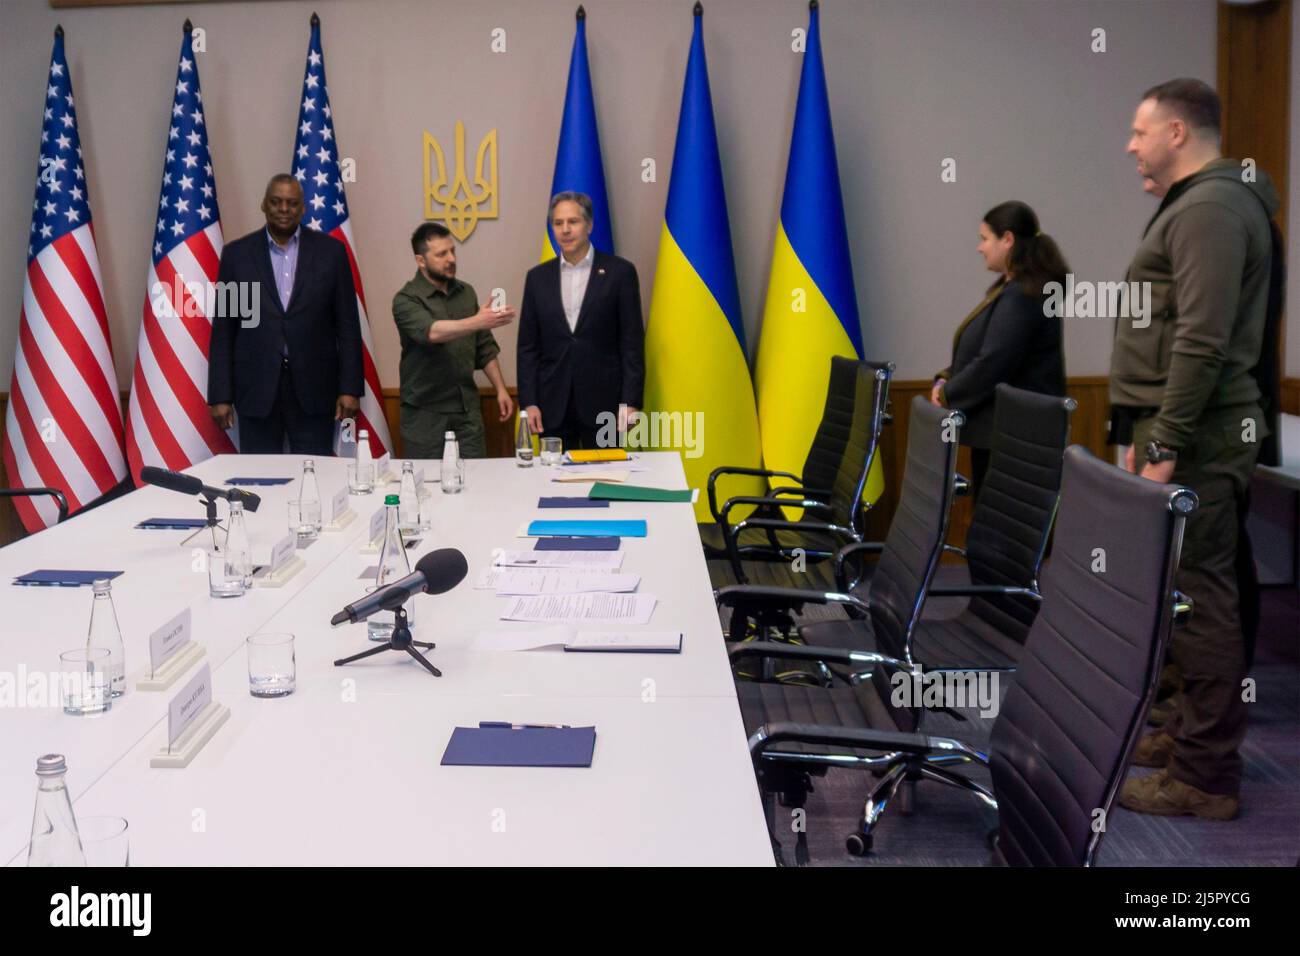 Kyiv, Ukraine. 24th Apr, 2022. Ukrainian President Volodymyr Zelenskyy, center, introduces his team to U.S. Secretary of State Tony Blinken, right, and U.S. Secretary of Defense Lloyd Austin, left, before the start of a face-to-face meeting, April 24, 2022 in Kyiv, Ukraine. Austin and Blinken are the highest ranking U.S. officials to visit Kyiv since the Russian invasion. Credit: U.S. State Department/U.S. State Department/Alamy Live News Stock Photo